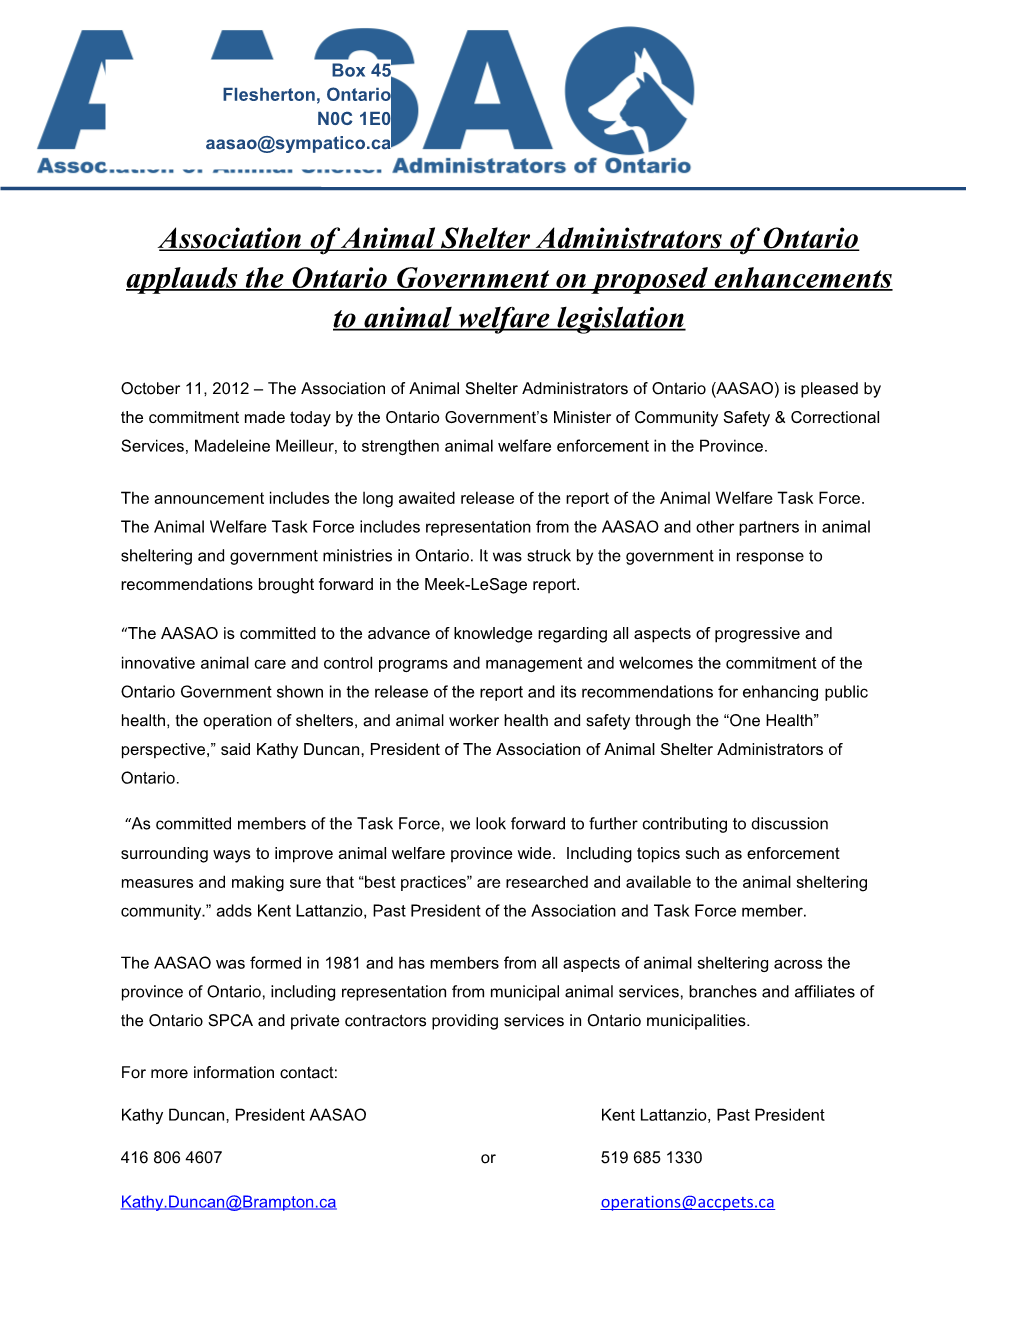 Association of Animal Shelter Administrators of Ontario Applauds the Ontario Government